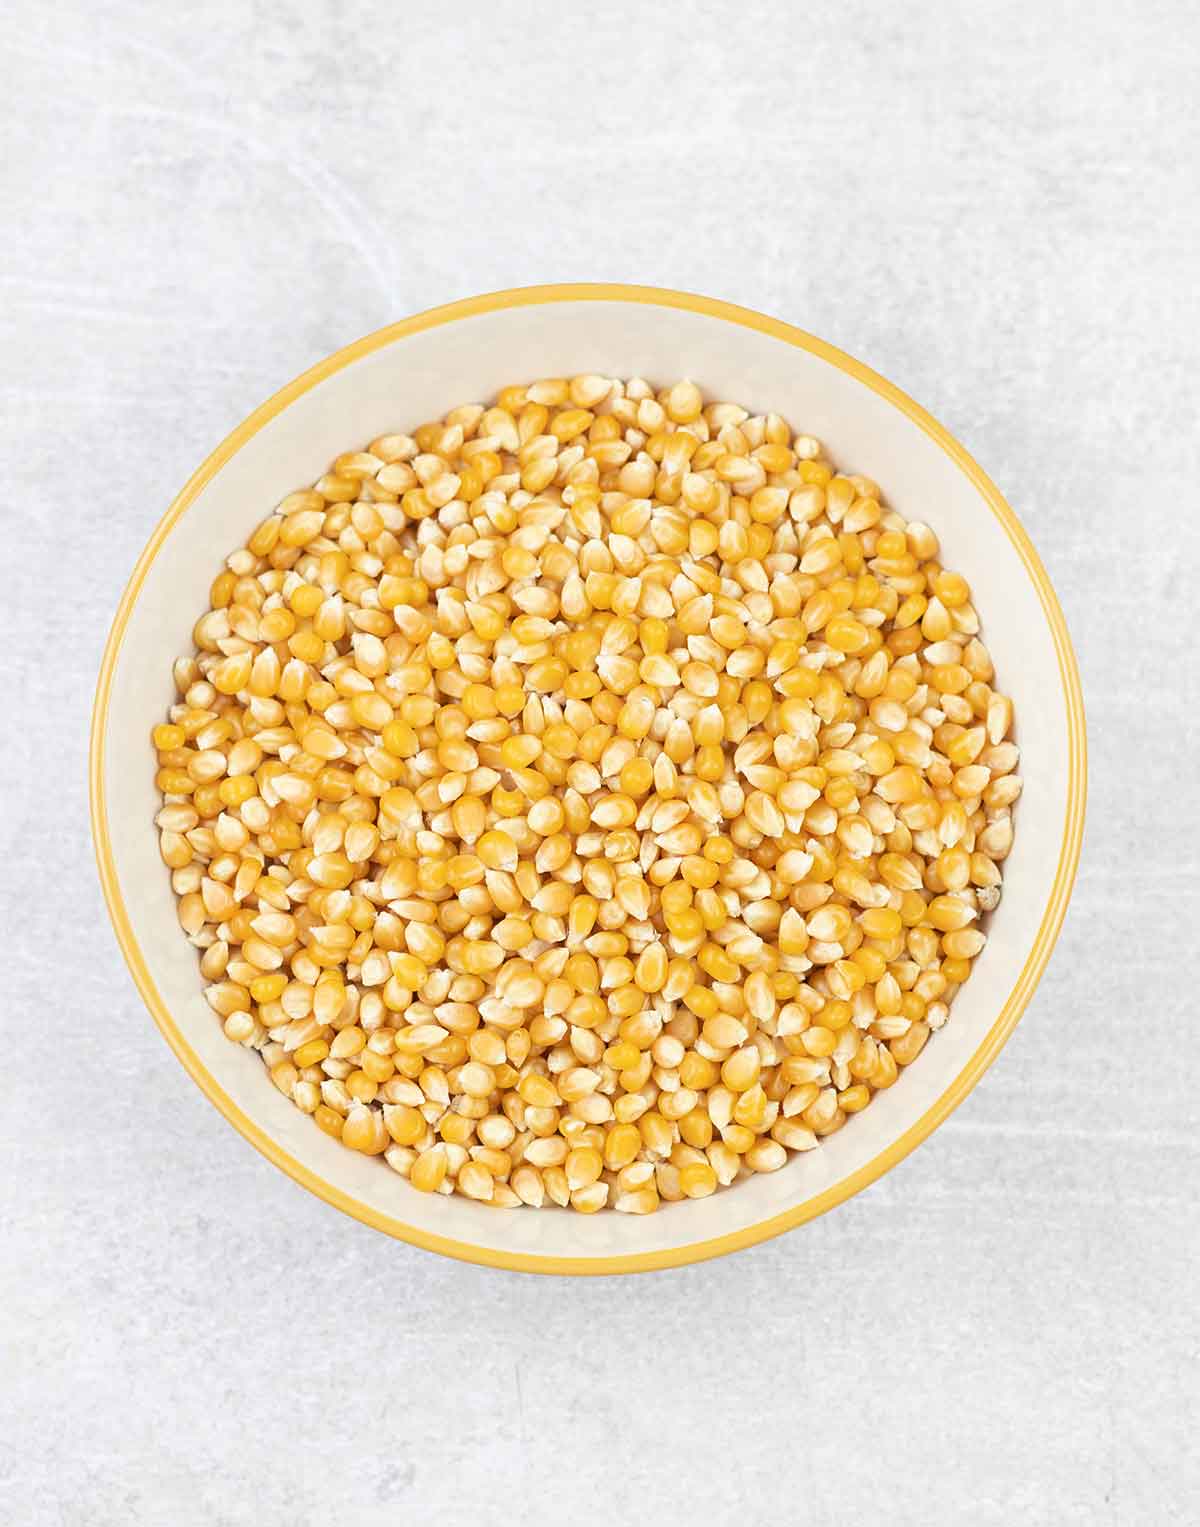 Dried corn kernels in a bowl.